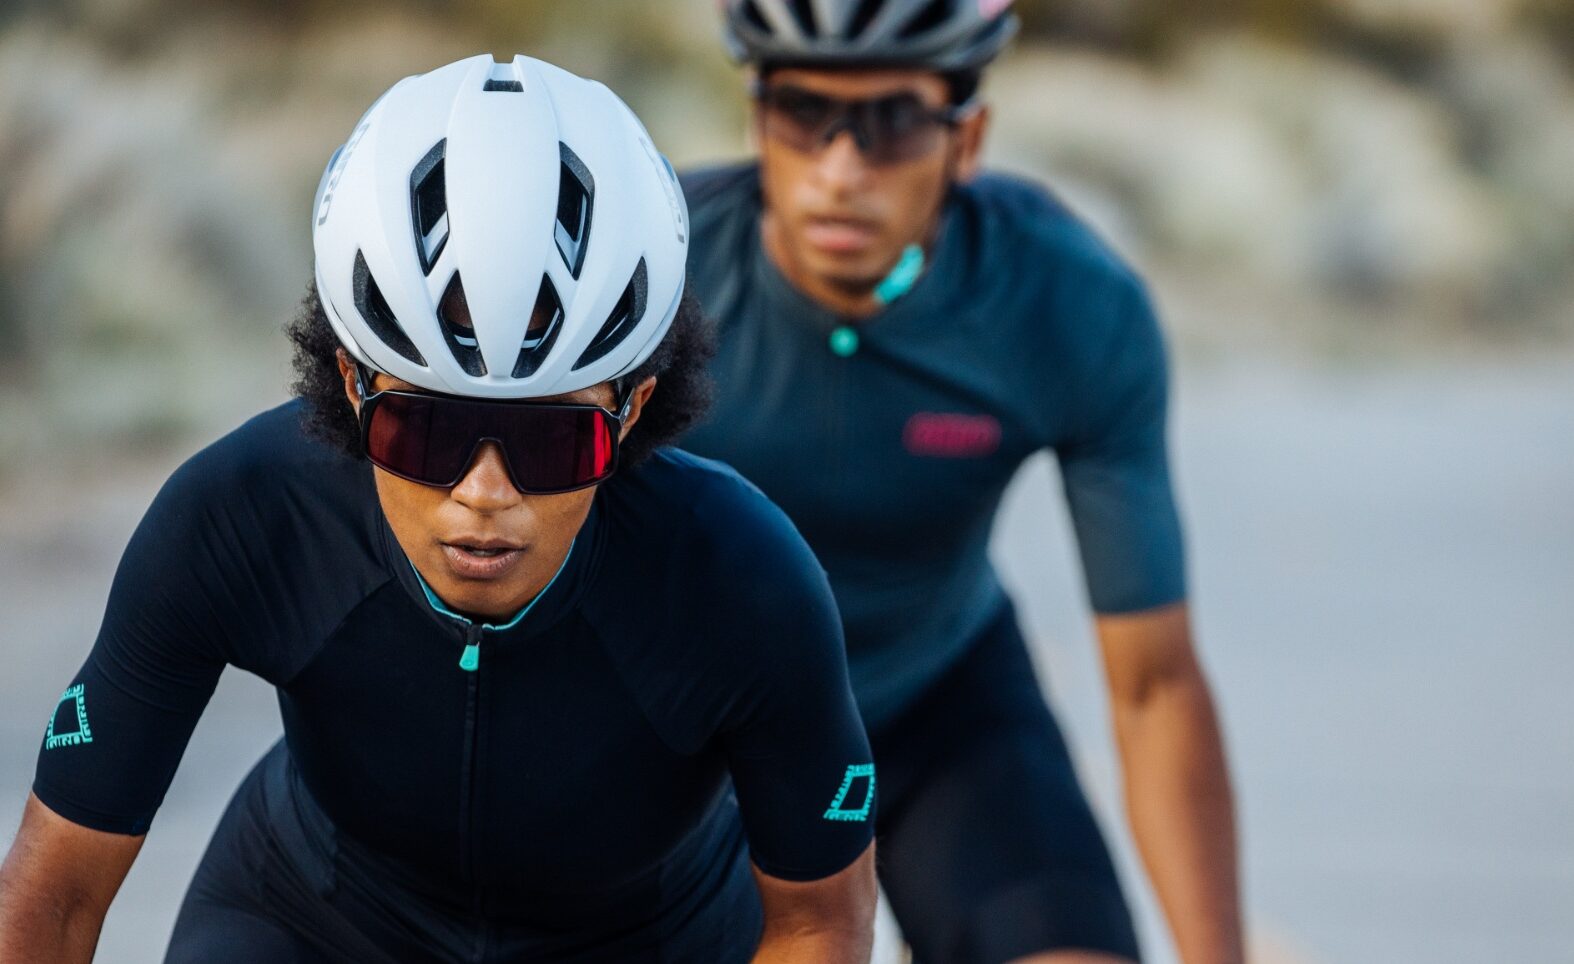 Giro Eclipse Spherical helmet claims a new precedent in speed and ...